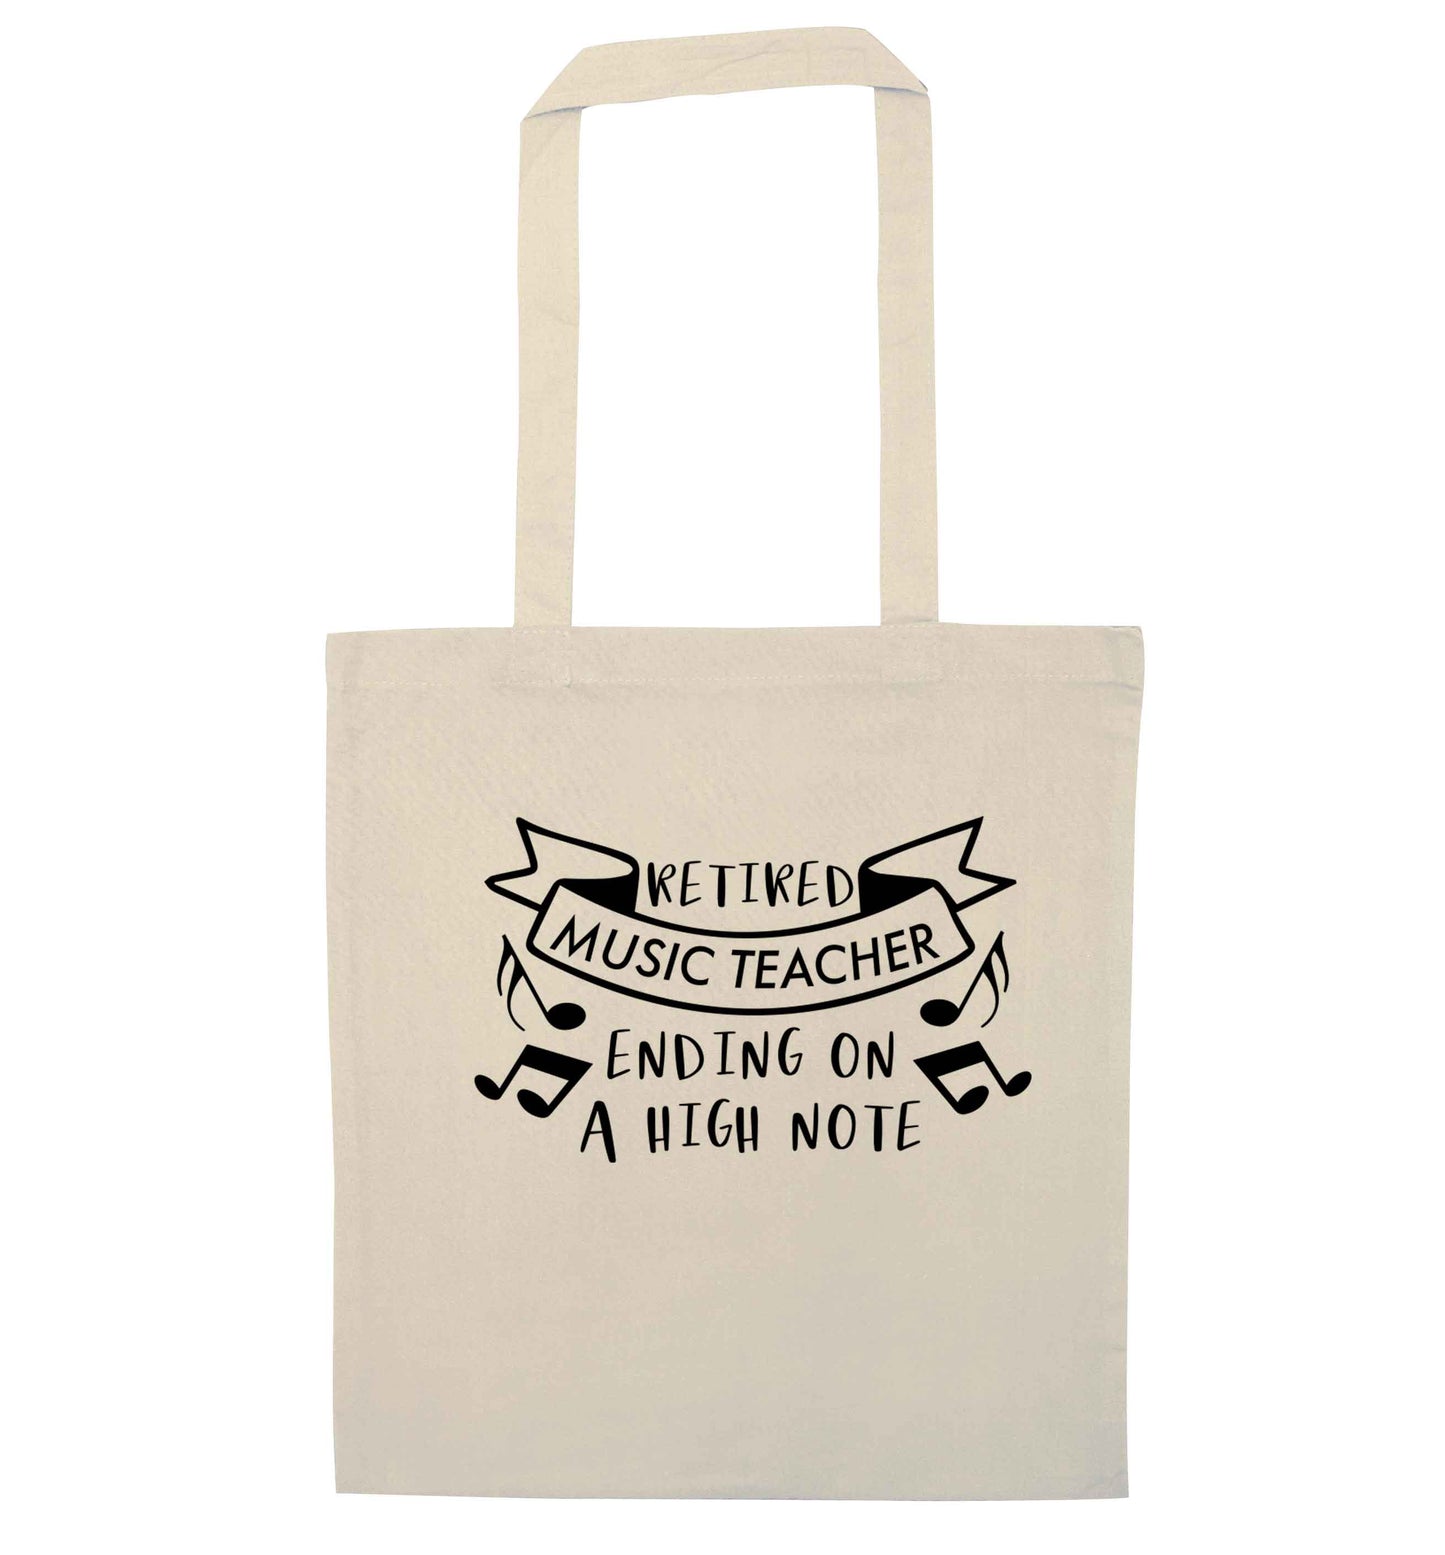 Retired music teacher ending on a high note natural tote bag